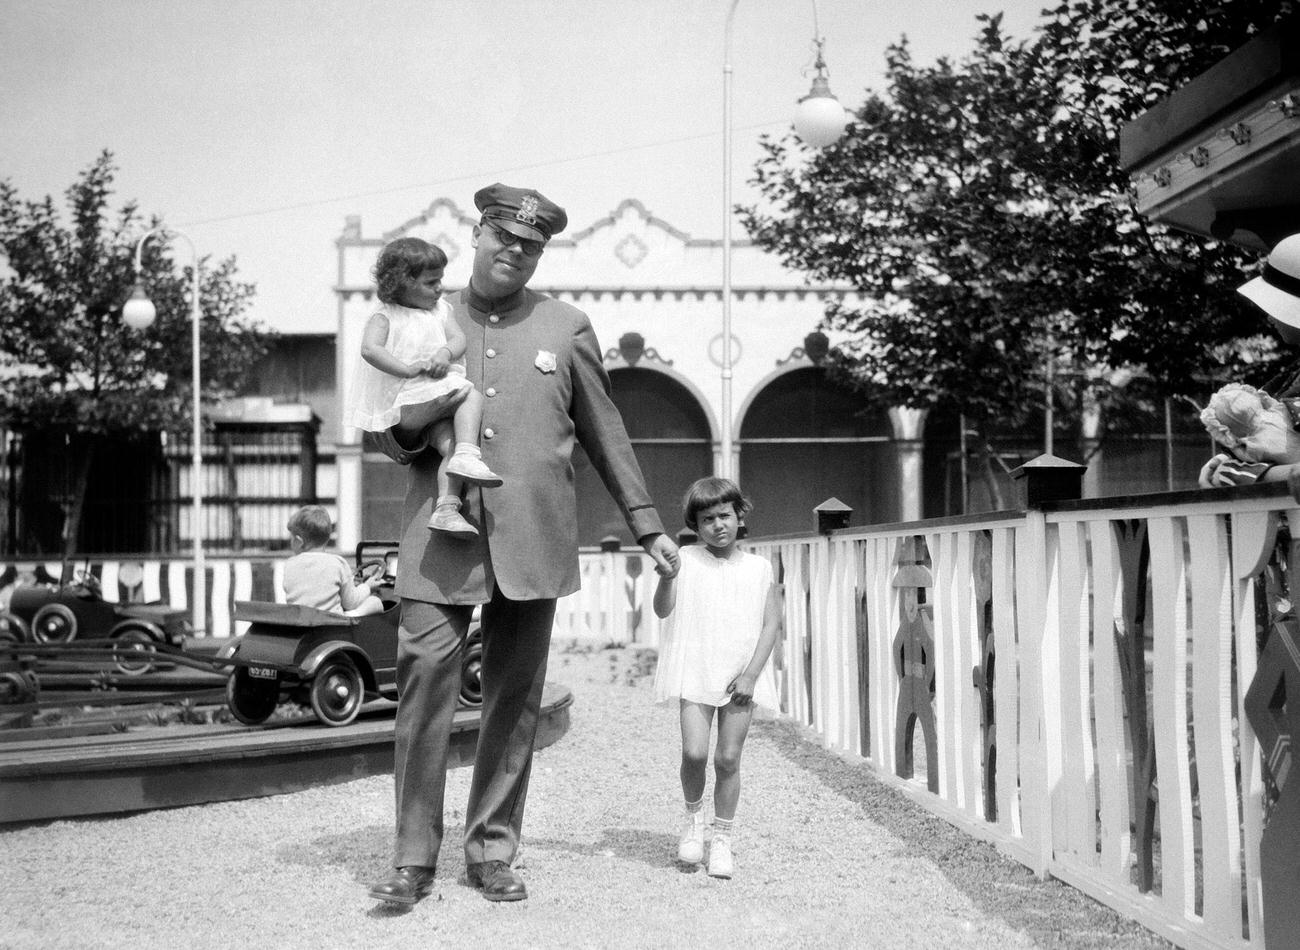 Police Entertaining Lost Children At Coney Island, 1931